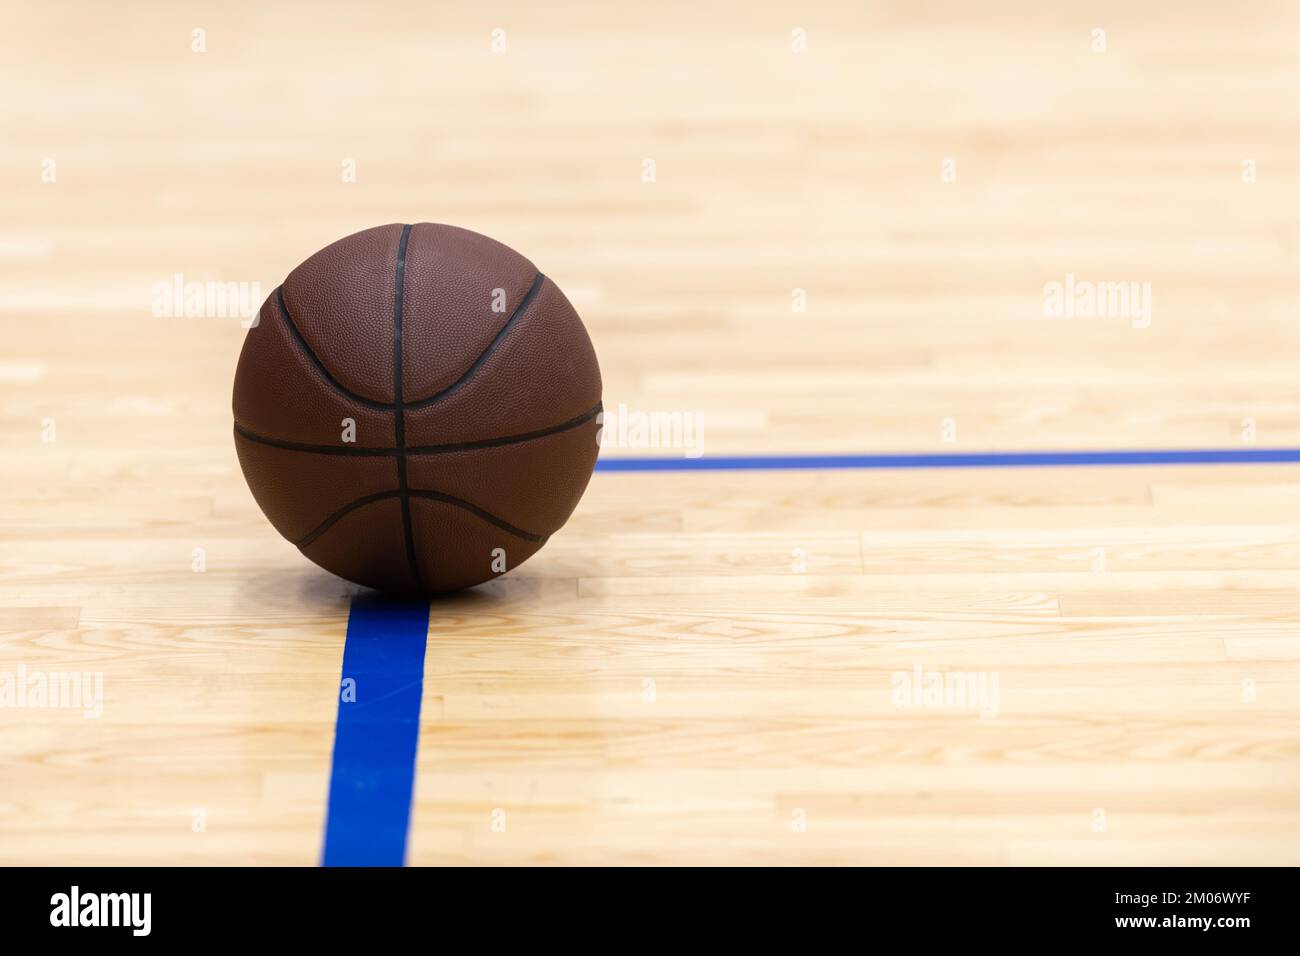 Basketball on hardwood court floor. Horizontal sport theme poster, greeting cards, headers, website and app Stock Photo